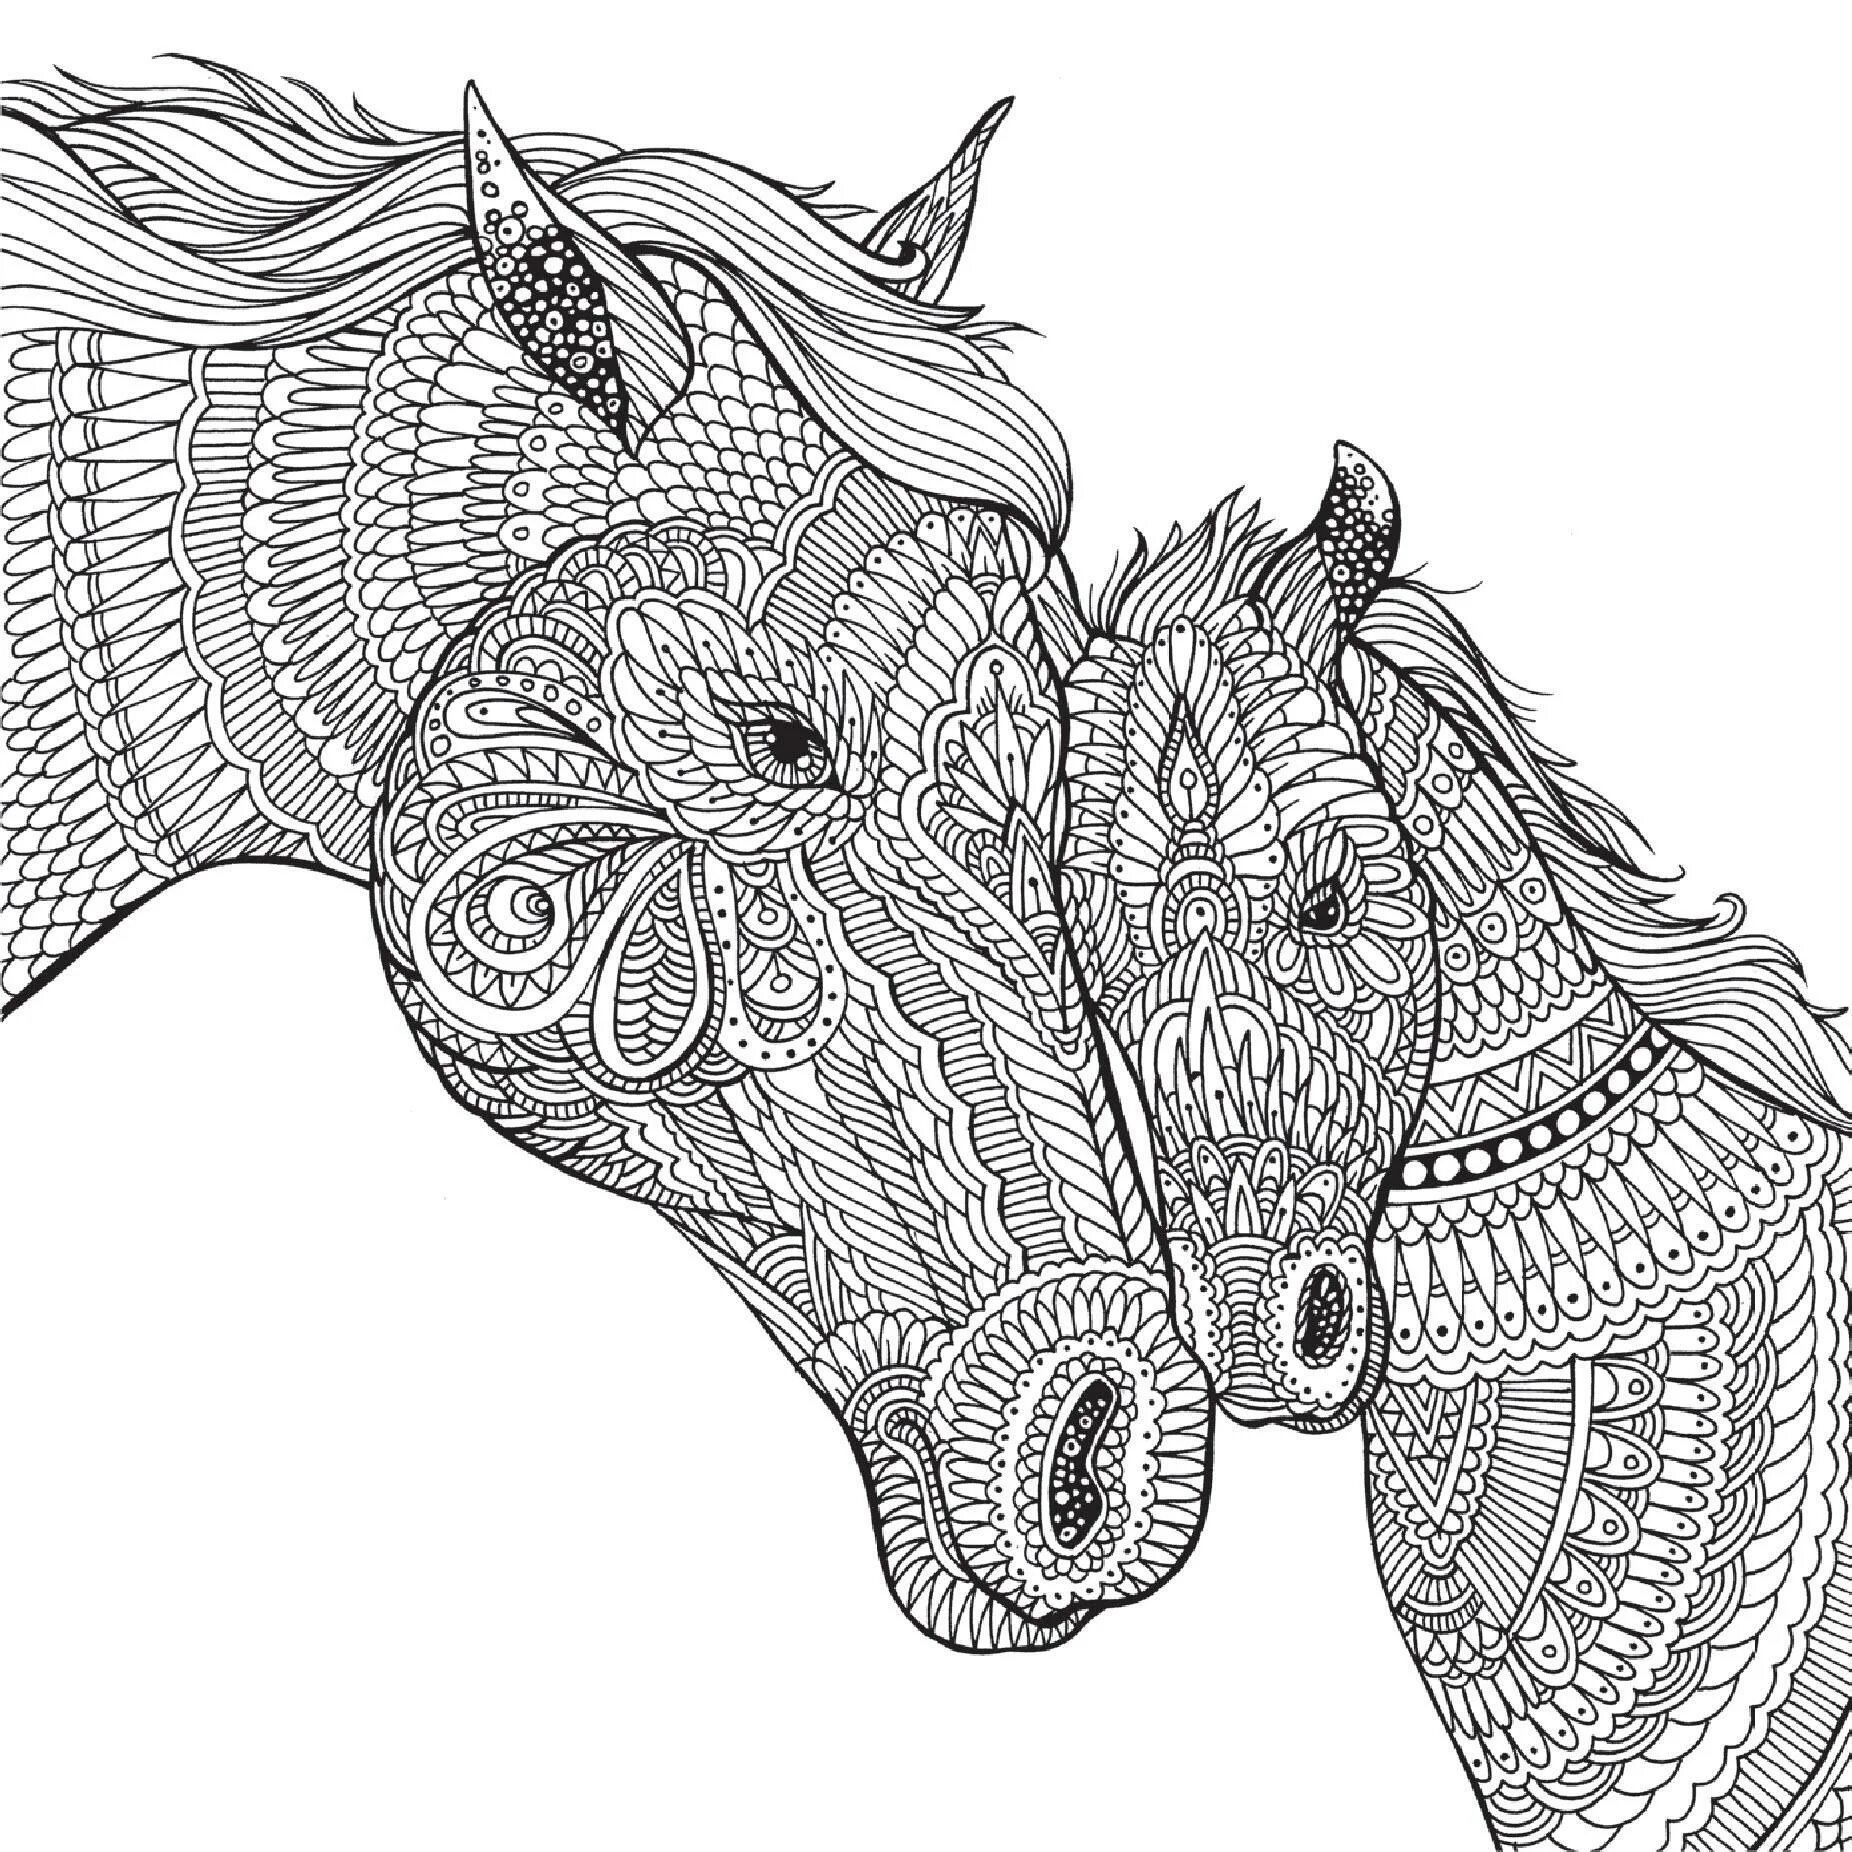 Coloring book live anti-stress complex of animals